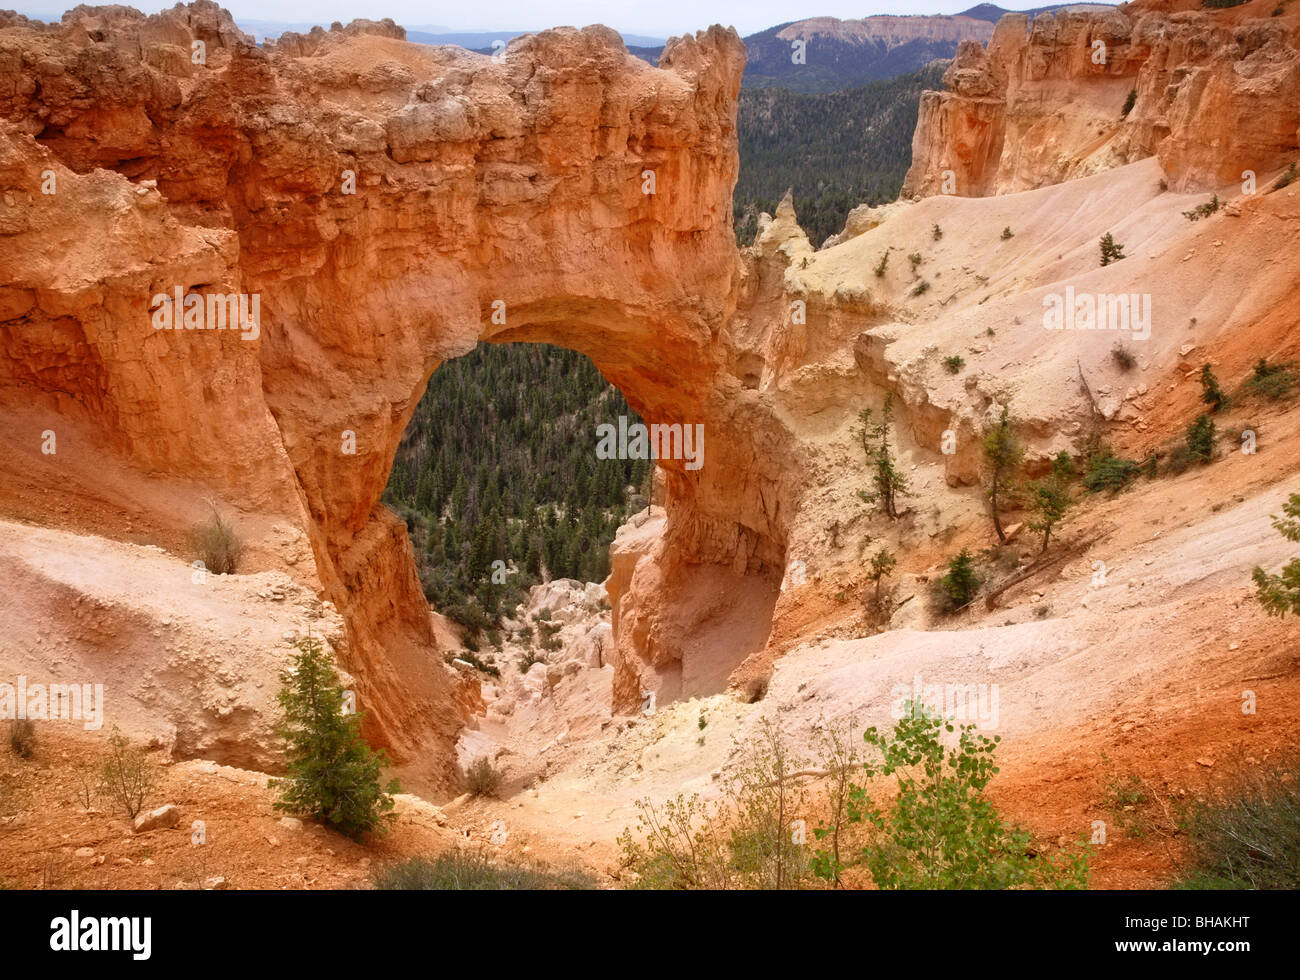 Red rocks forming natural arch in Bryce Canyon National Park, Utah, U.S.A. Stock Photo